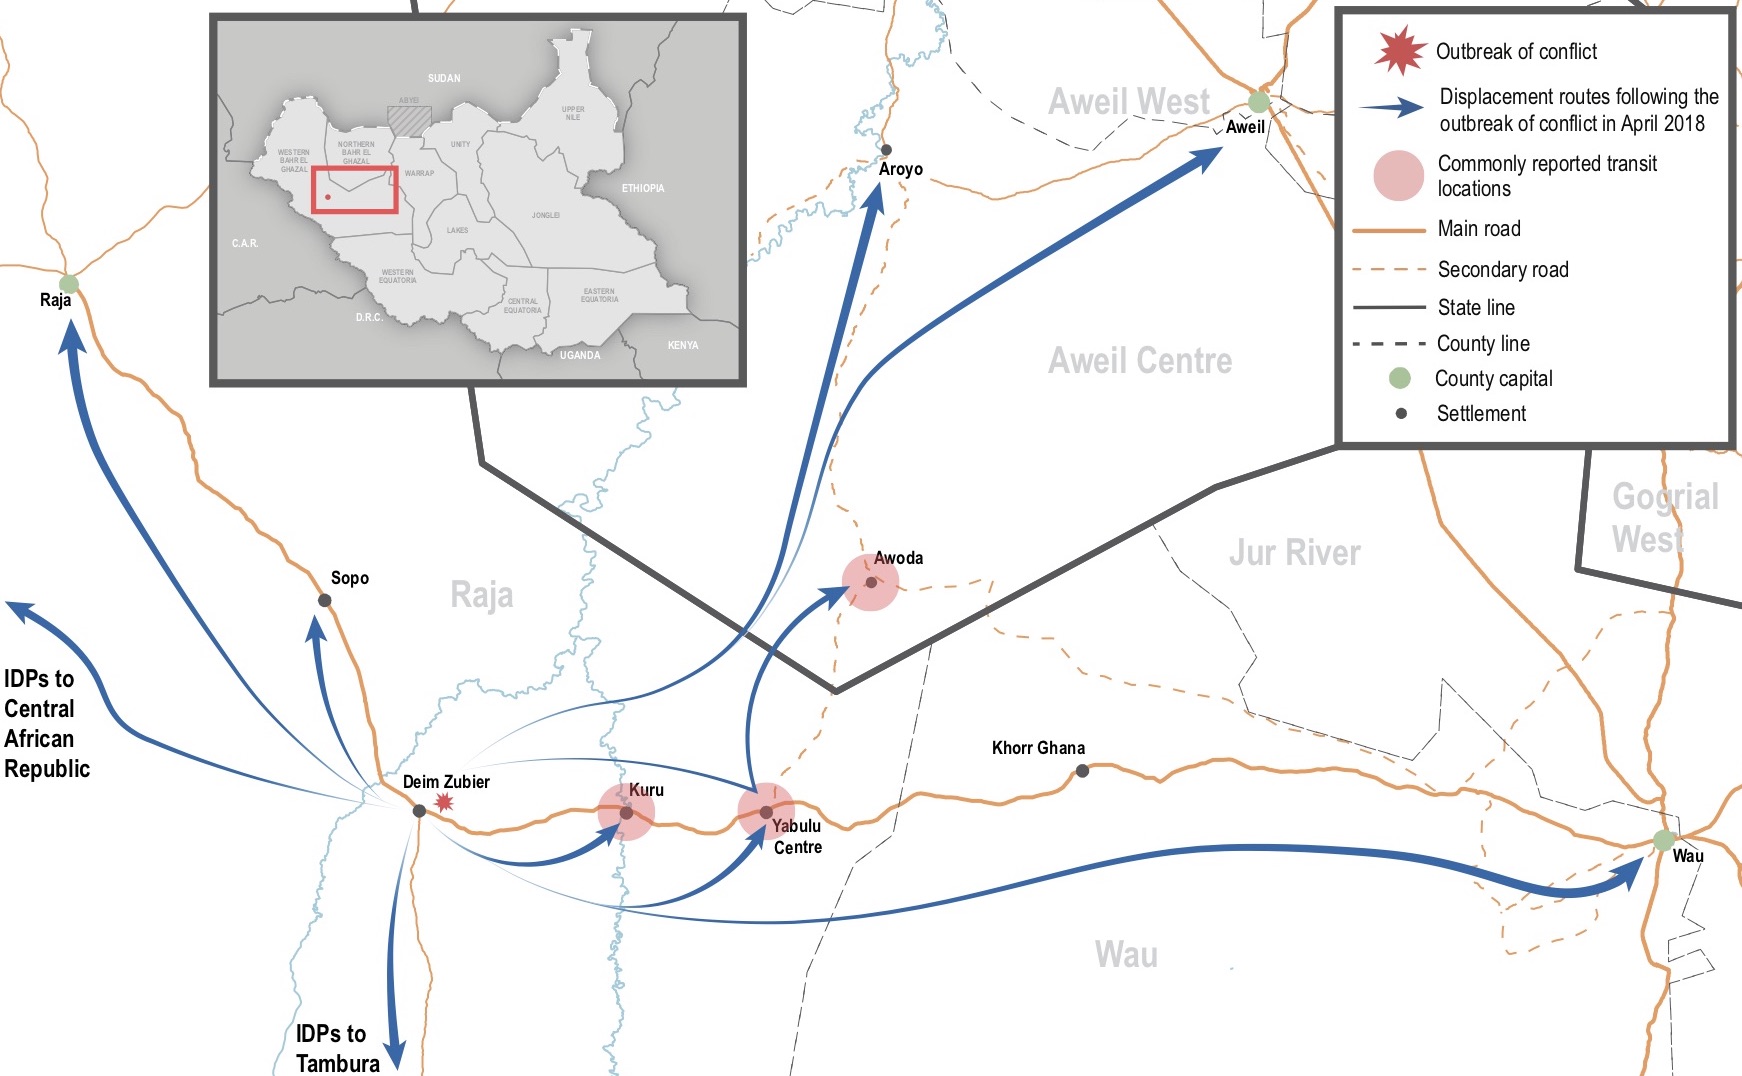 Displacement routes and destinations of IDPs fleeing conflict in Deim Zubier, Raja County, South Sudan. ©REACH/2018